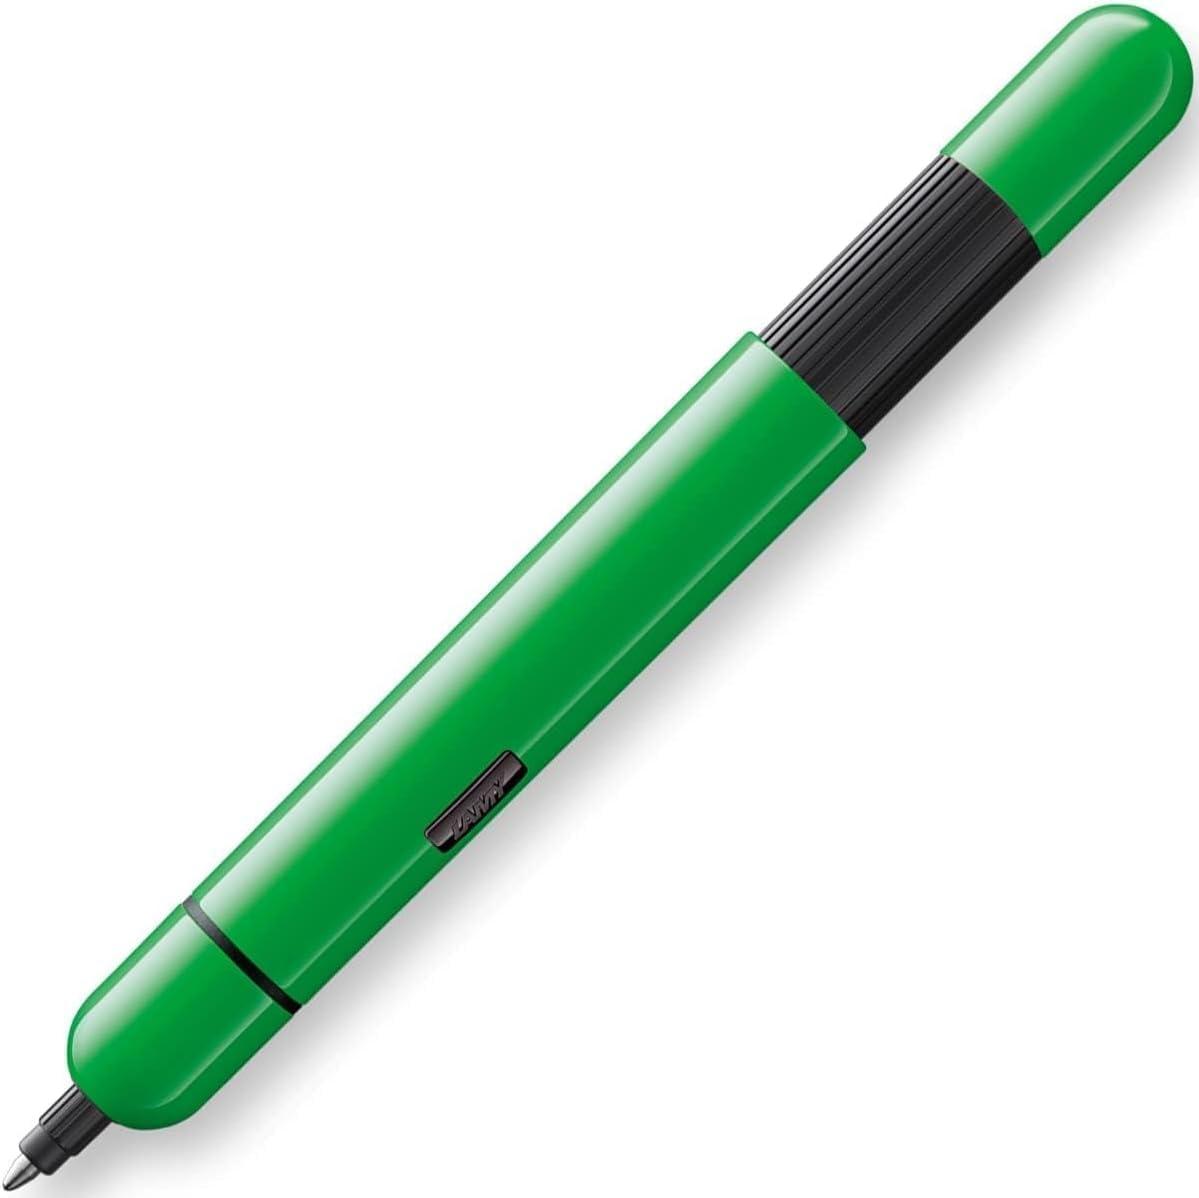 lamy pico ballpoint pen 288 innovative metal ballpoint pen in neon green with refined push mechanism with